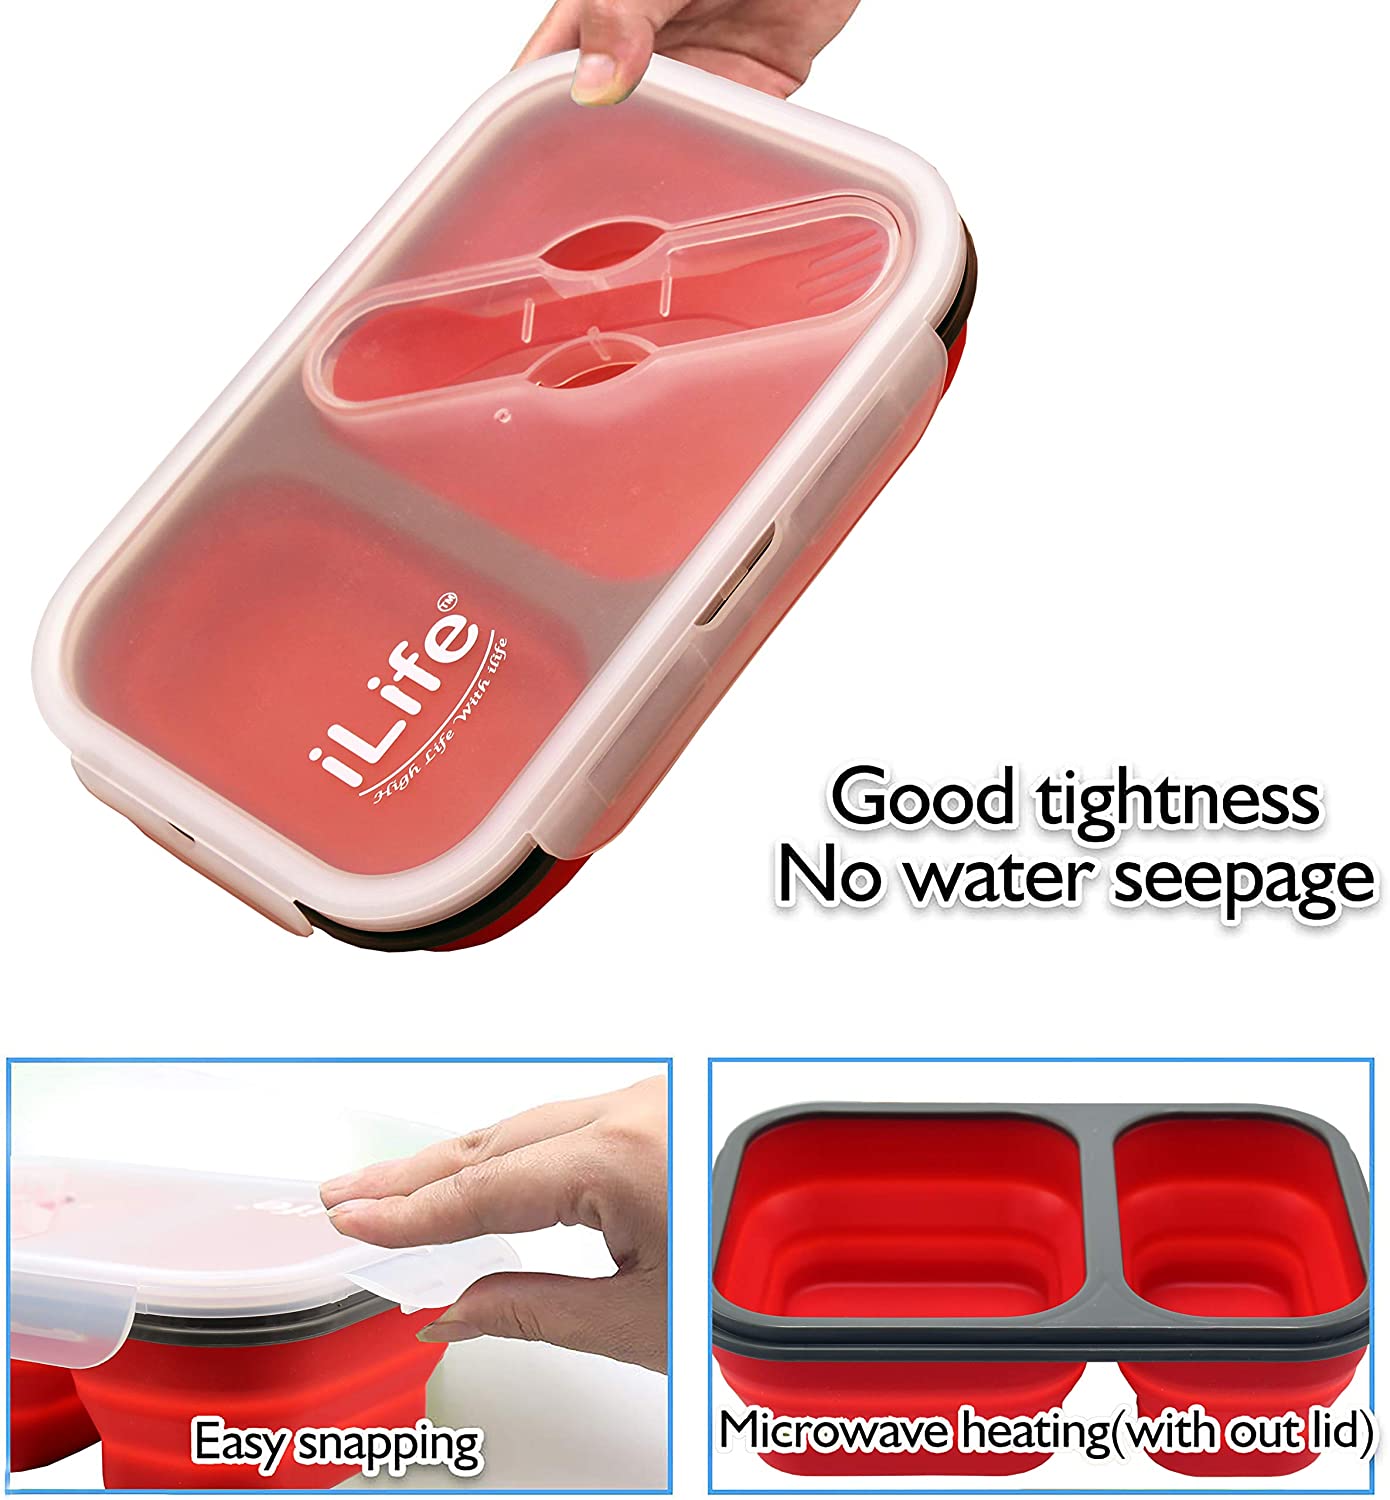 lunch box; expandable lunch box; collapsible lunch box; 2 compartment lunch box